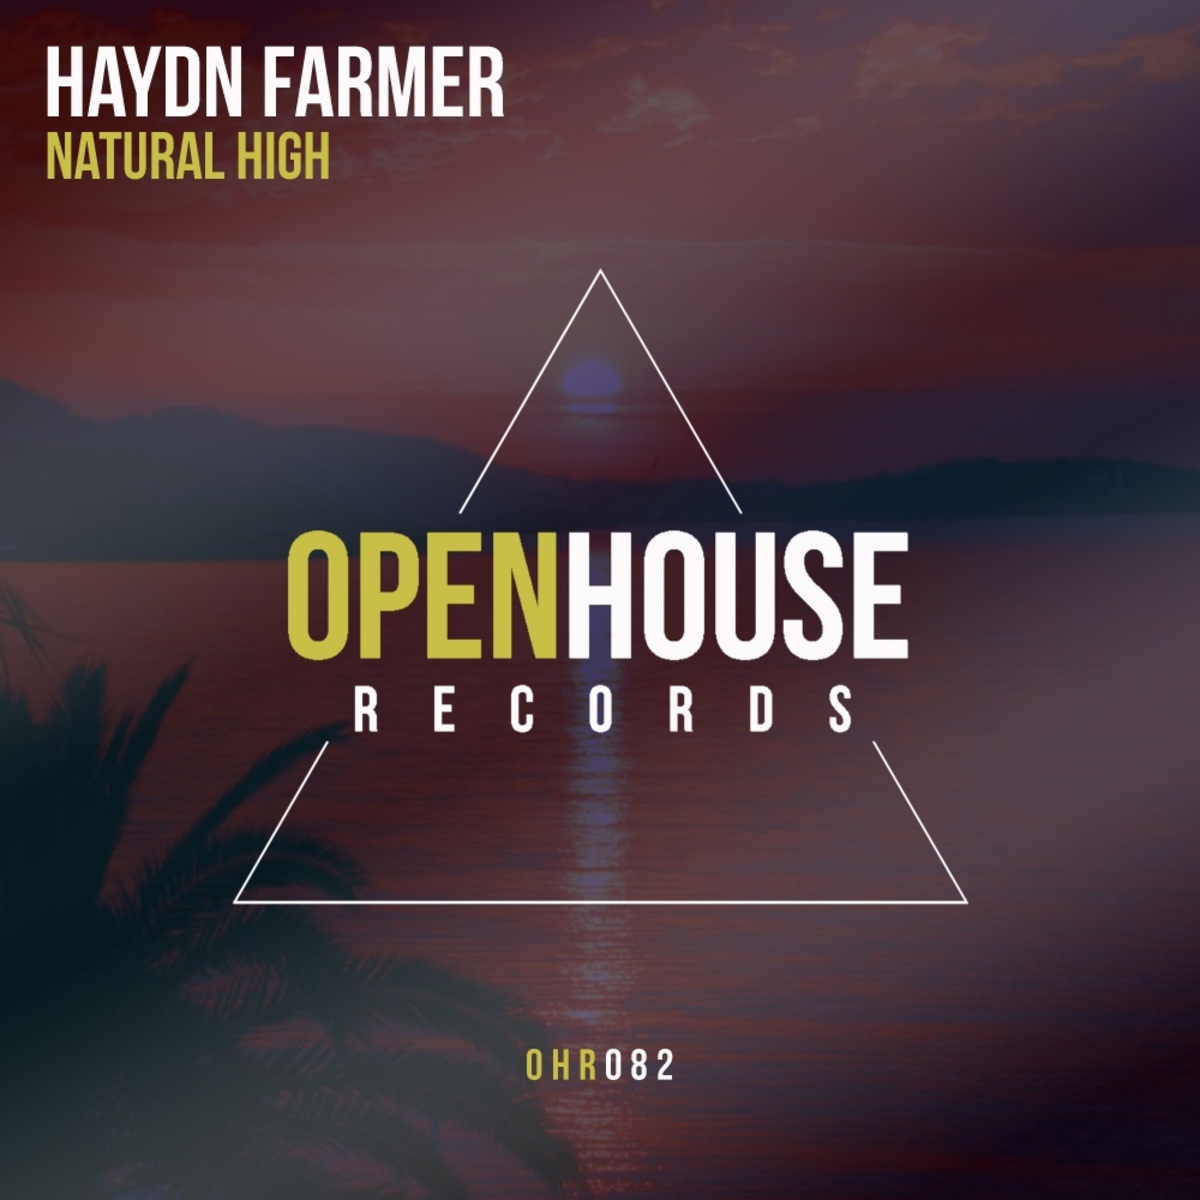 Haydn Farmer - Natural High / Open House Records